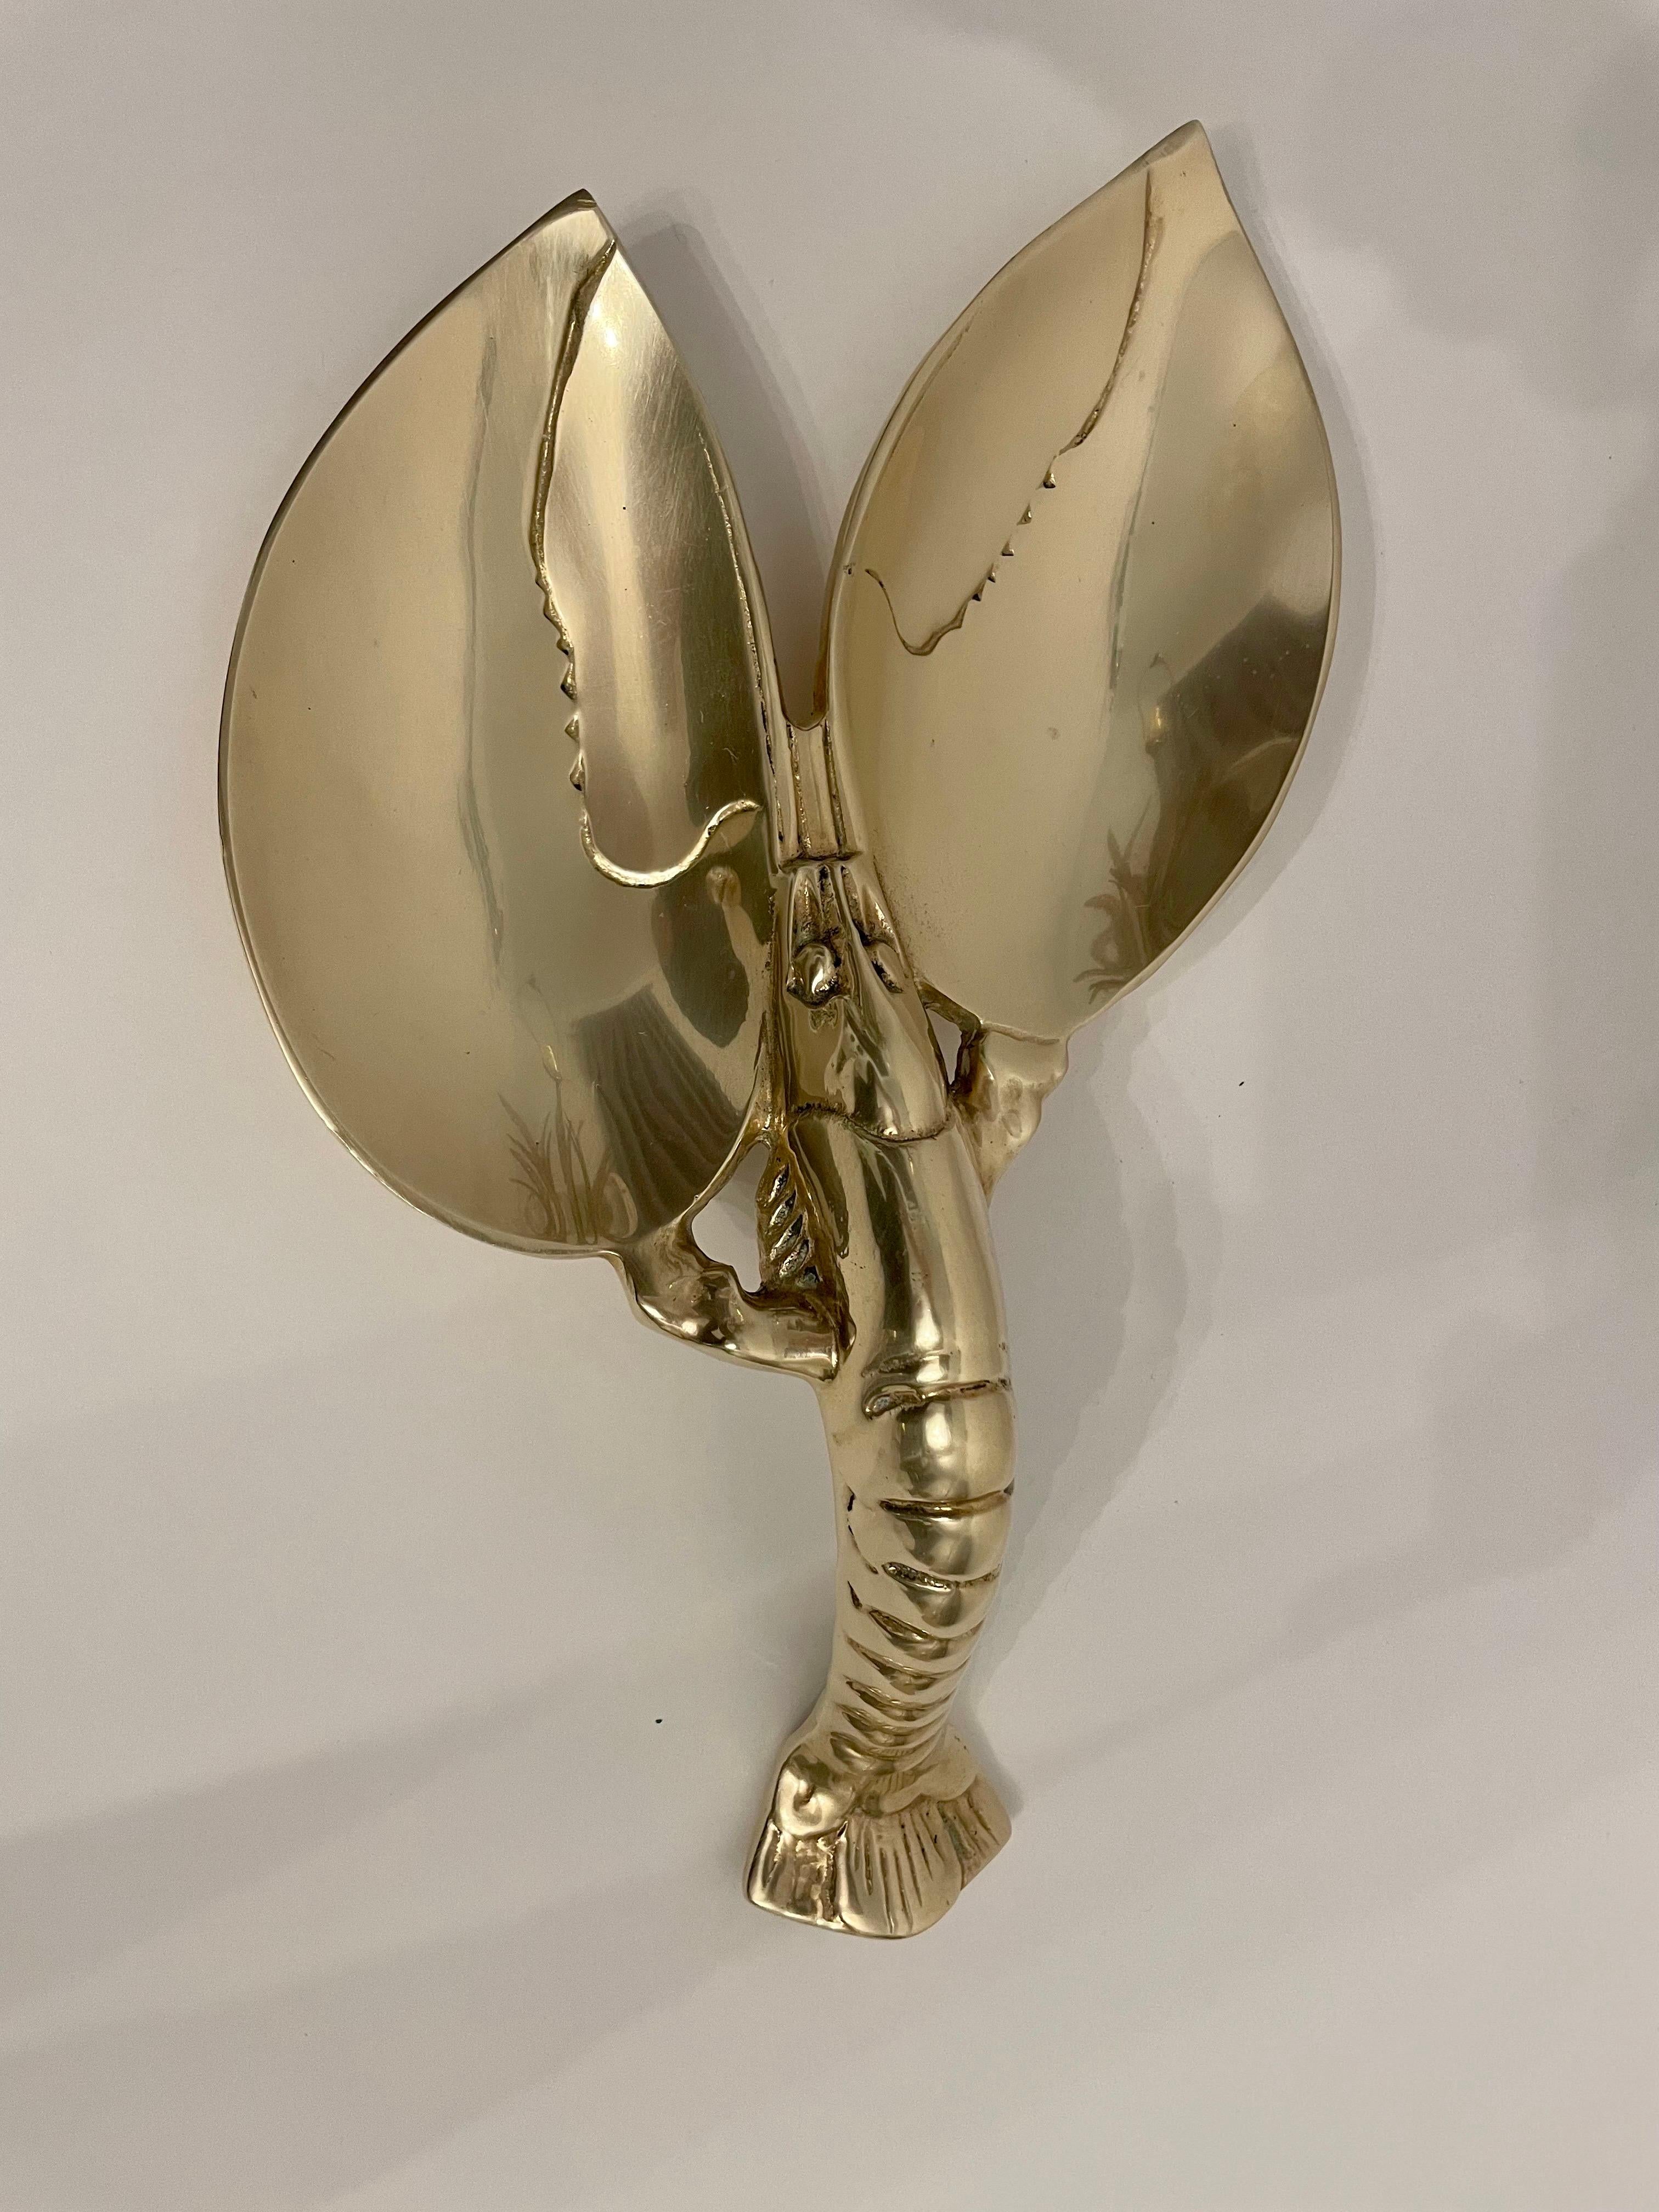 Large solid brass Lobster dish or Spoon rest. Hollywood Regency style. Measures: 13 1/2